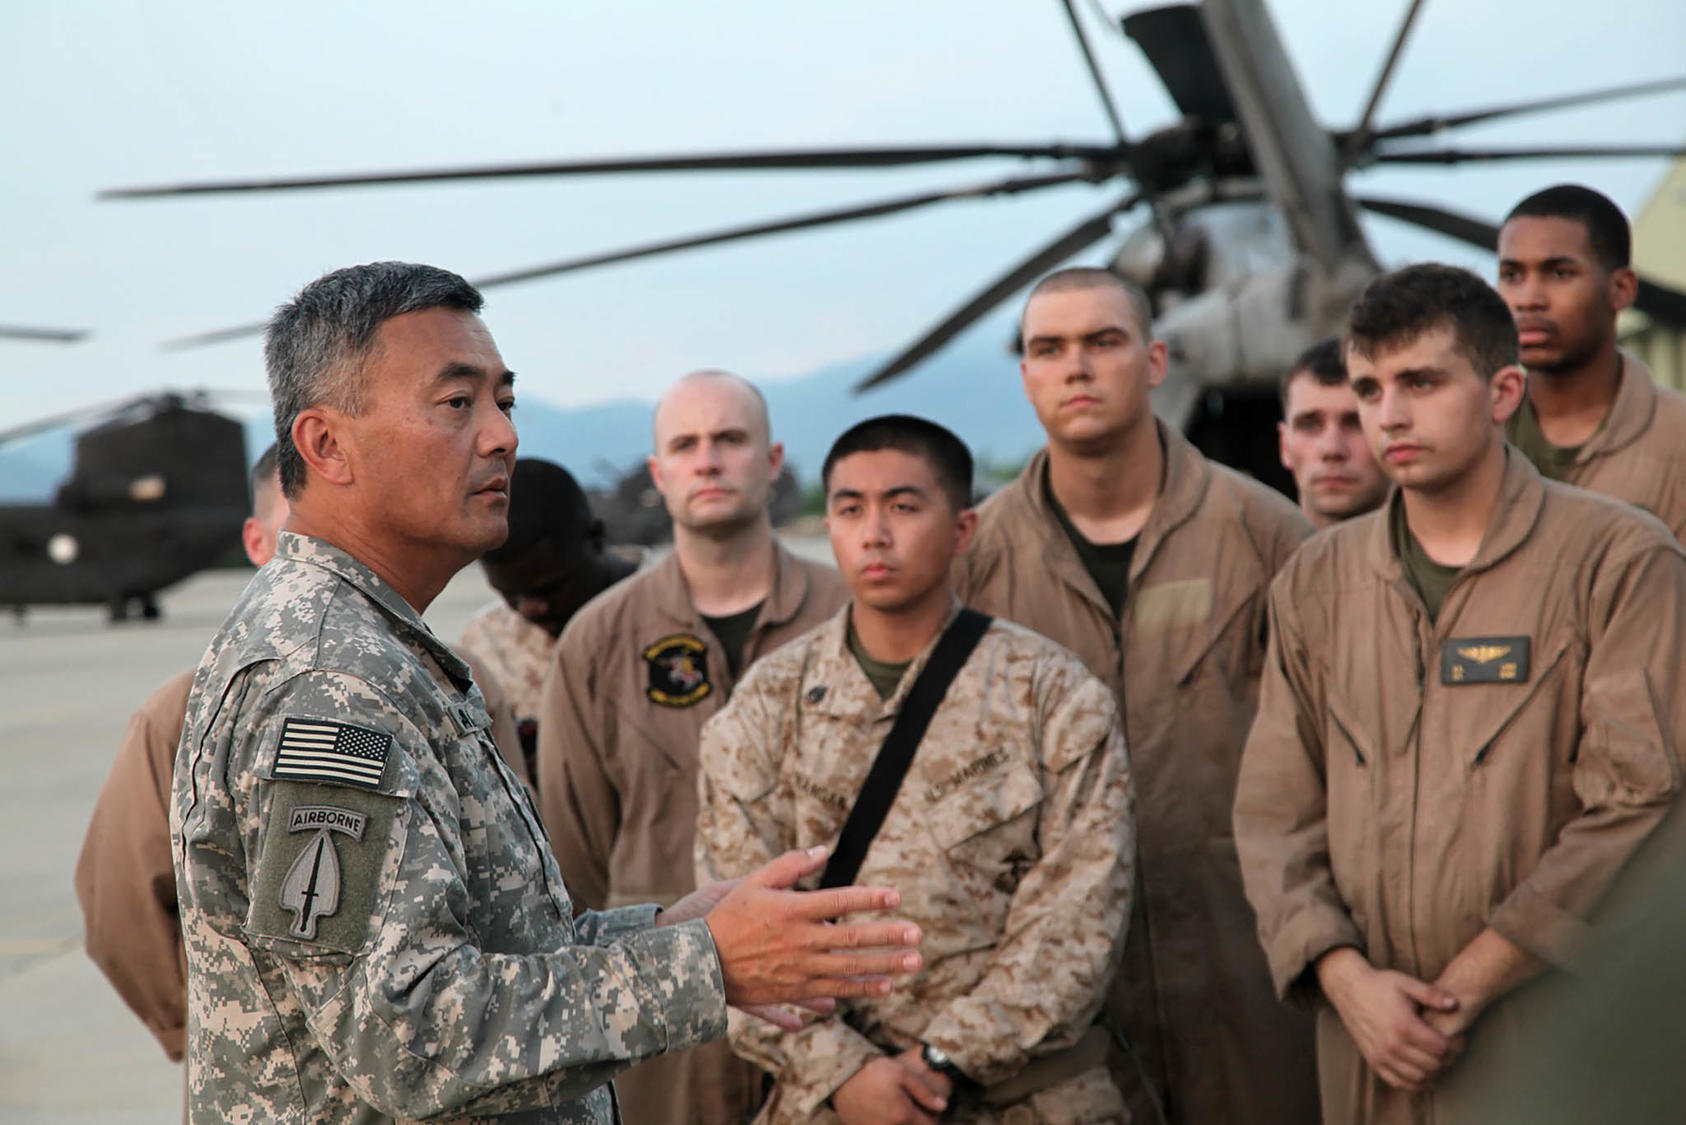 Then-Brigadier General Michael Nagata meets U.S. military crews flying aid to Pakistani regions stricken by floods in 2010. Nagata is one of USIP’s primary military advisors in its mission of reducing violent conflict abroad. (Staff Sgt. Horace Murray)